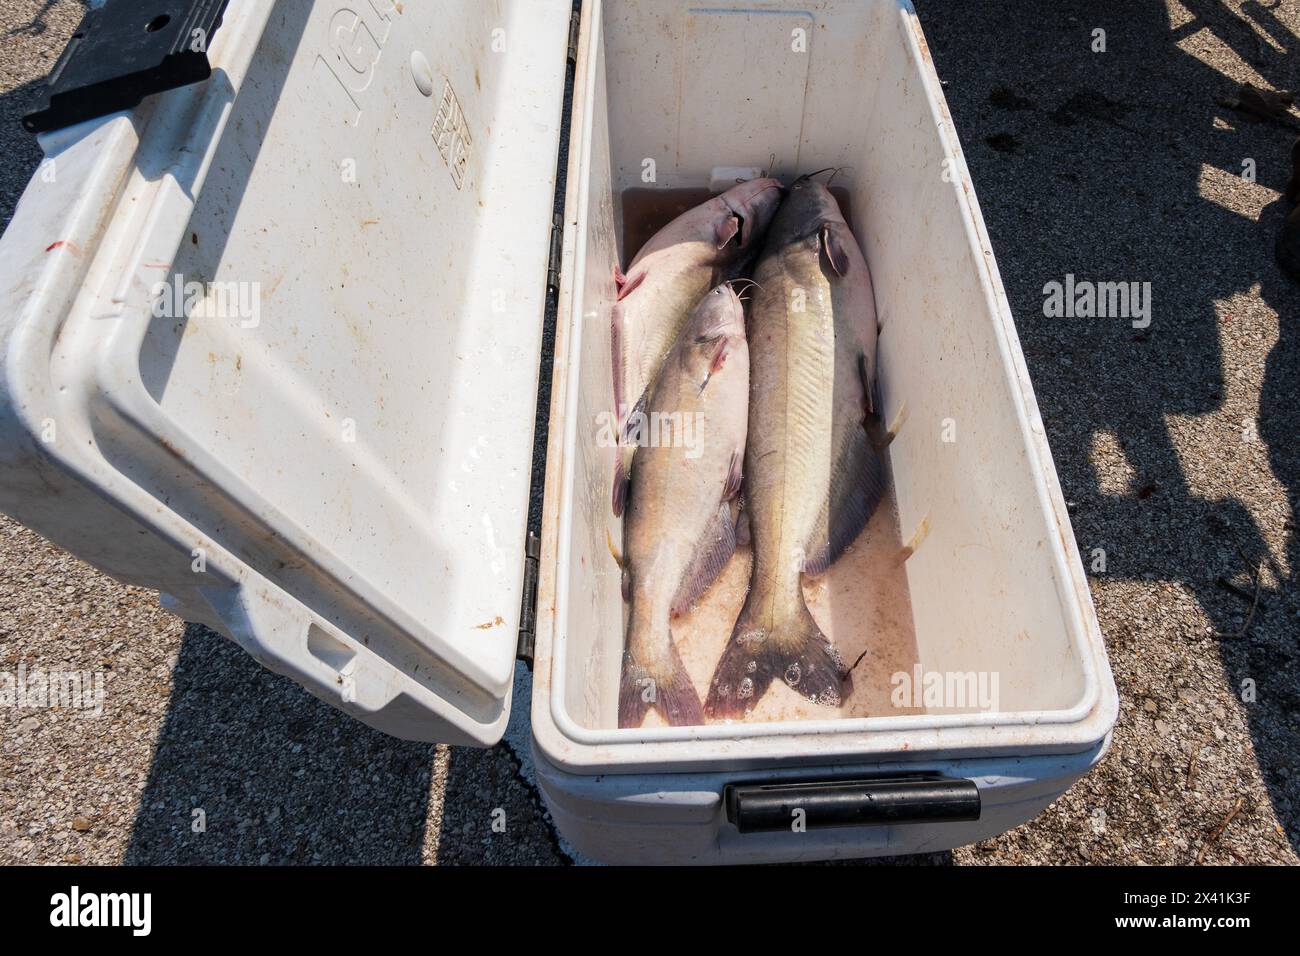 Three large Bluecat catfish, Ictalurus furcatus, resting in a box cooler ready to be cleaned and fileted after being caught in a lake. Oklahoma, USA. Stock Photo